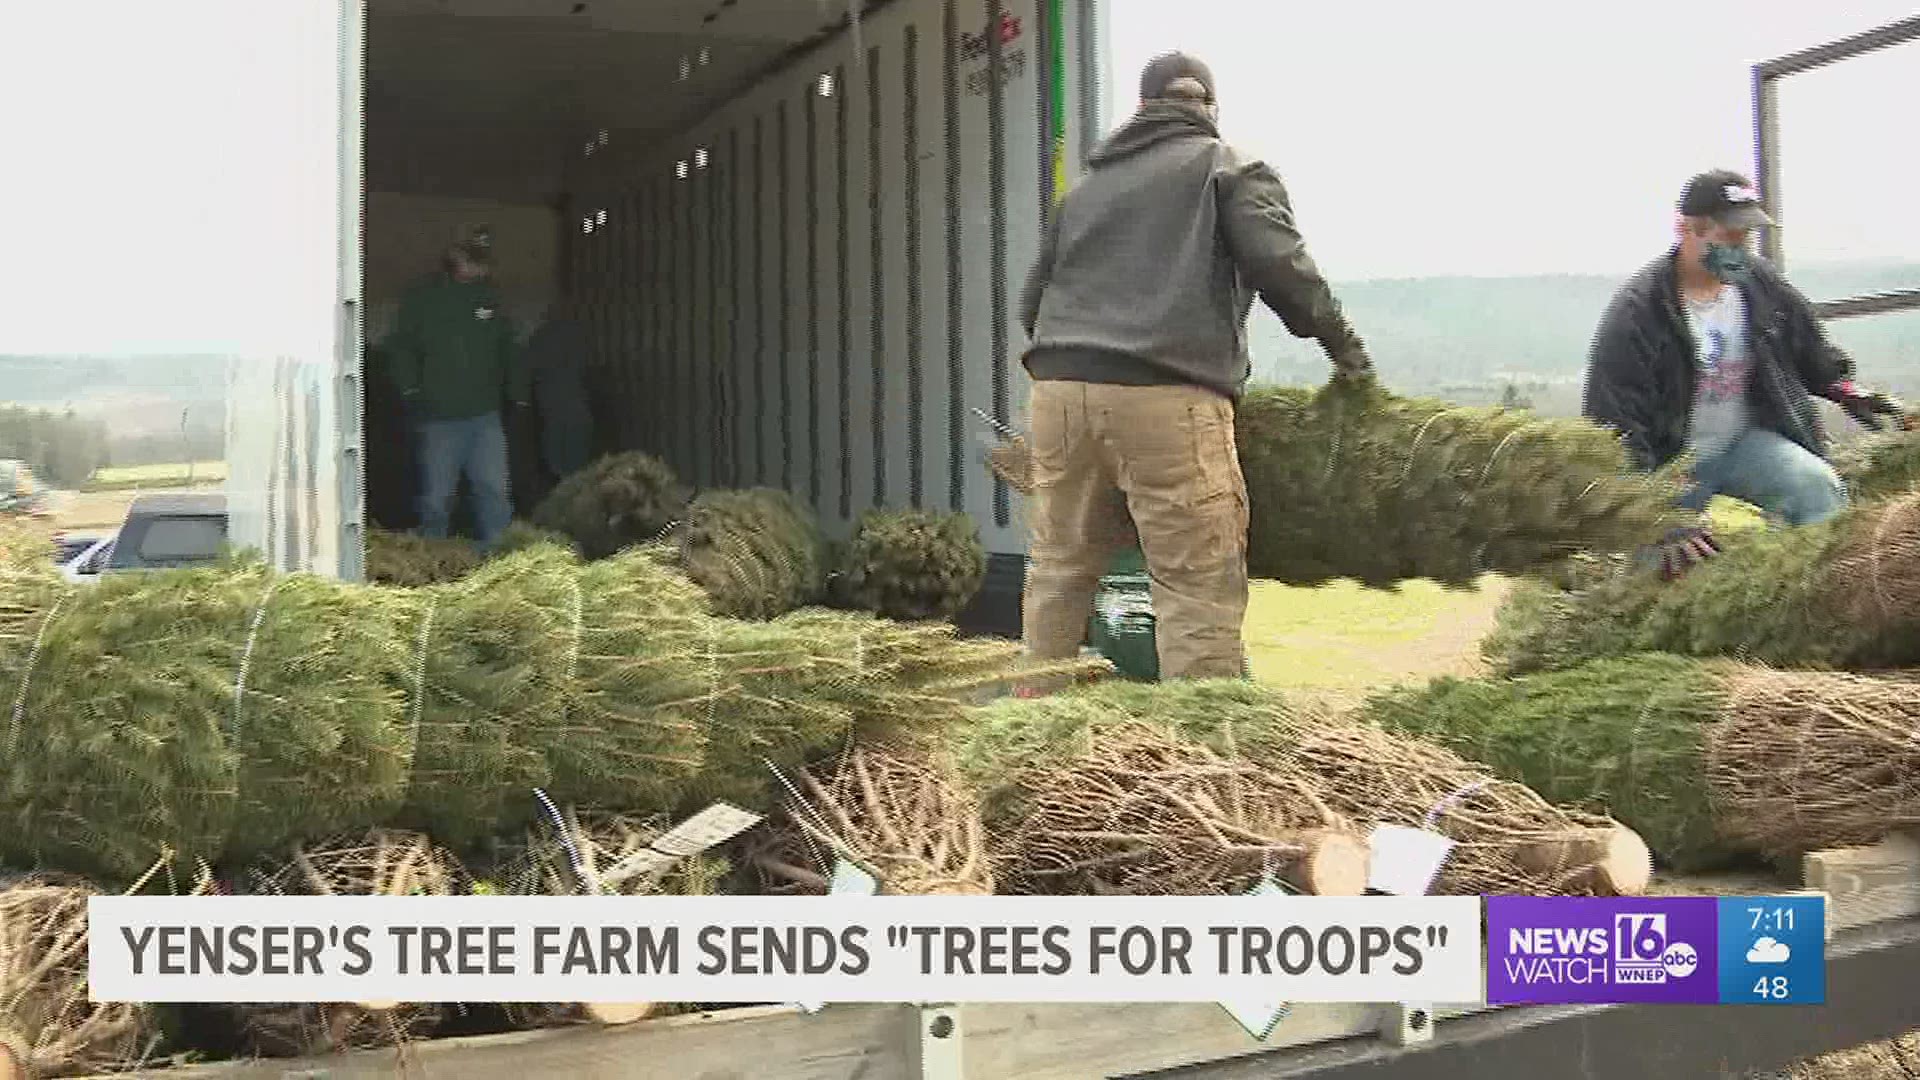 Hundreds of military families across the country will have their own Christmas tree to decorate this holiday season, thanks to a Carbon County farm.